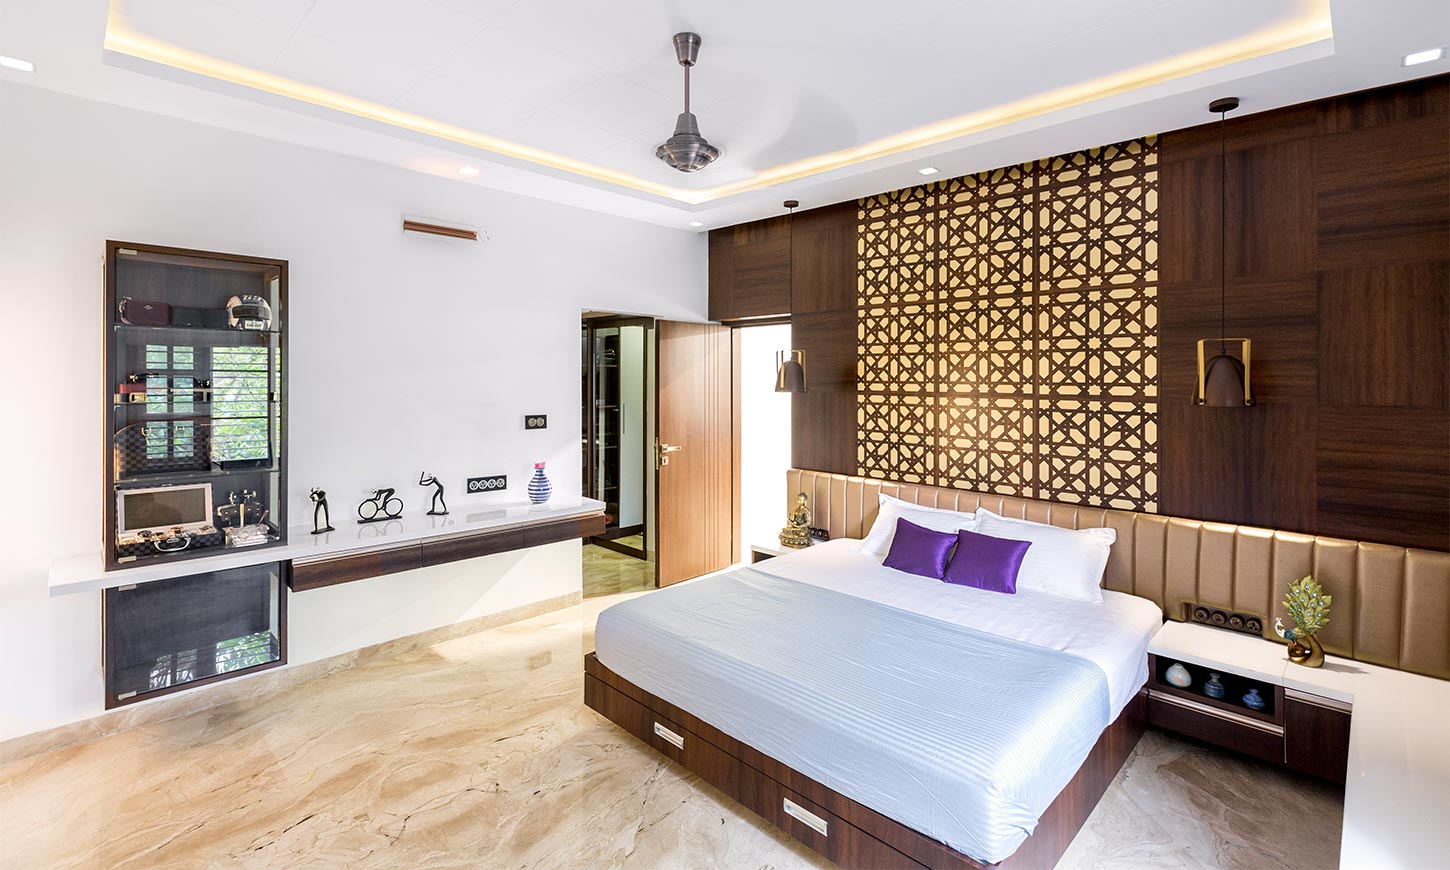 Bedroom interior designed by one of the best interior designers in bangalore